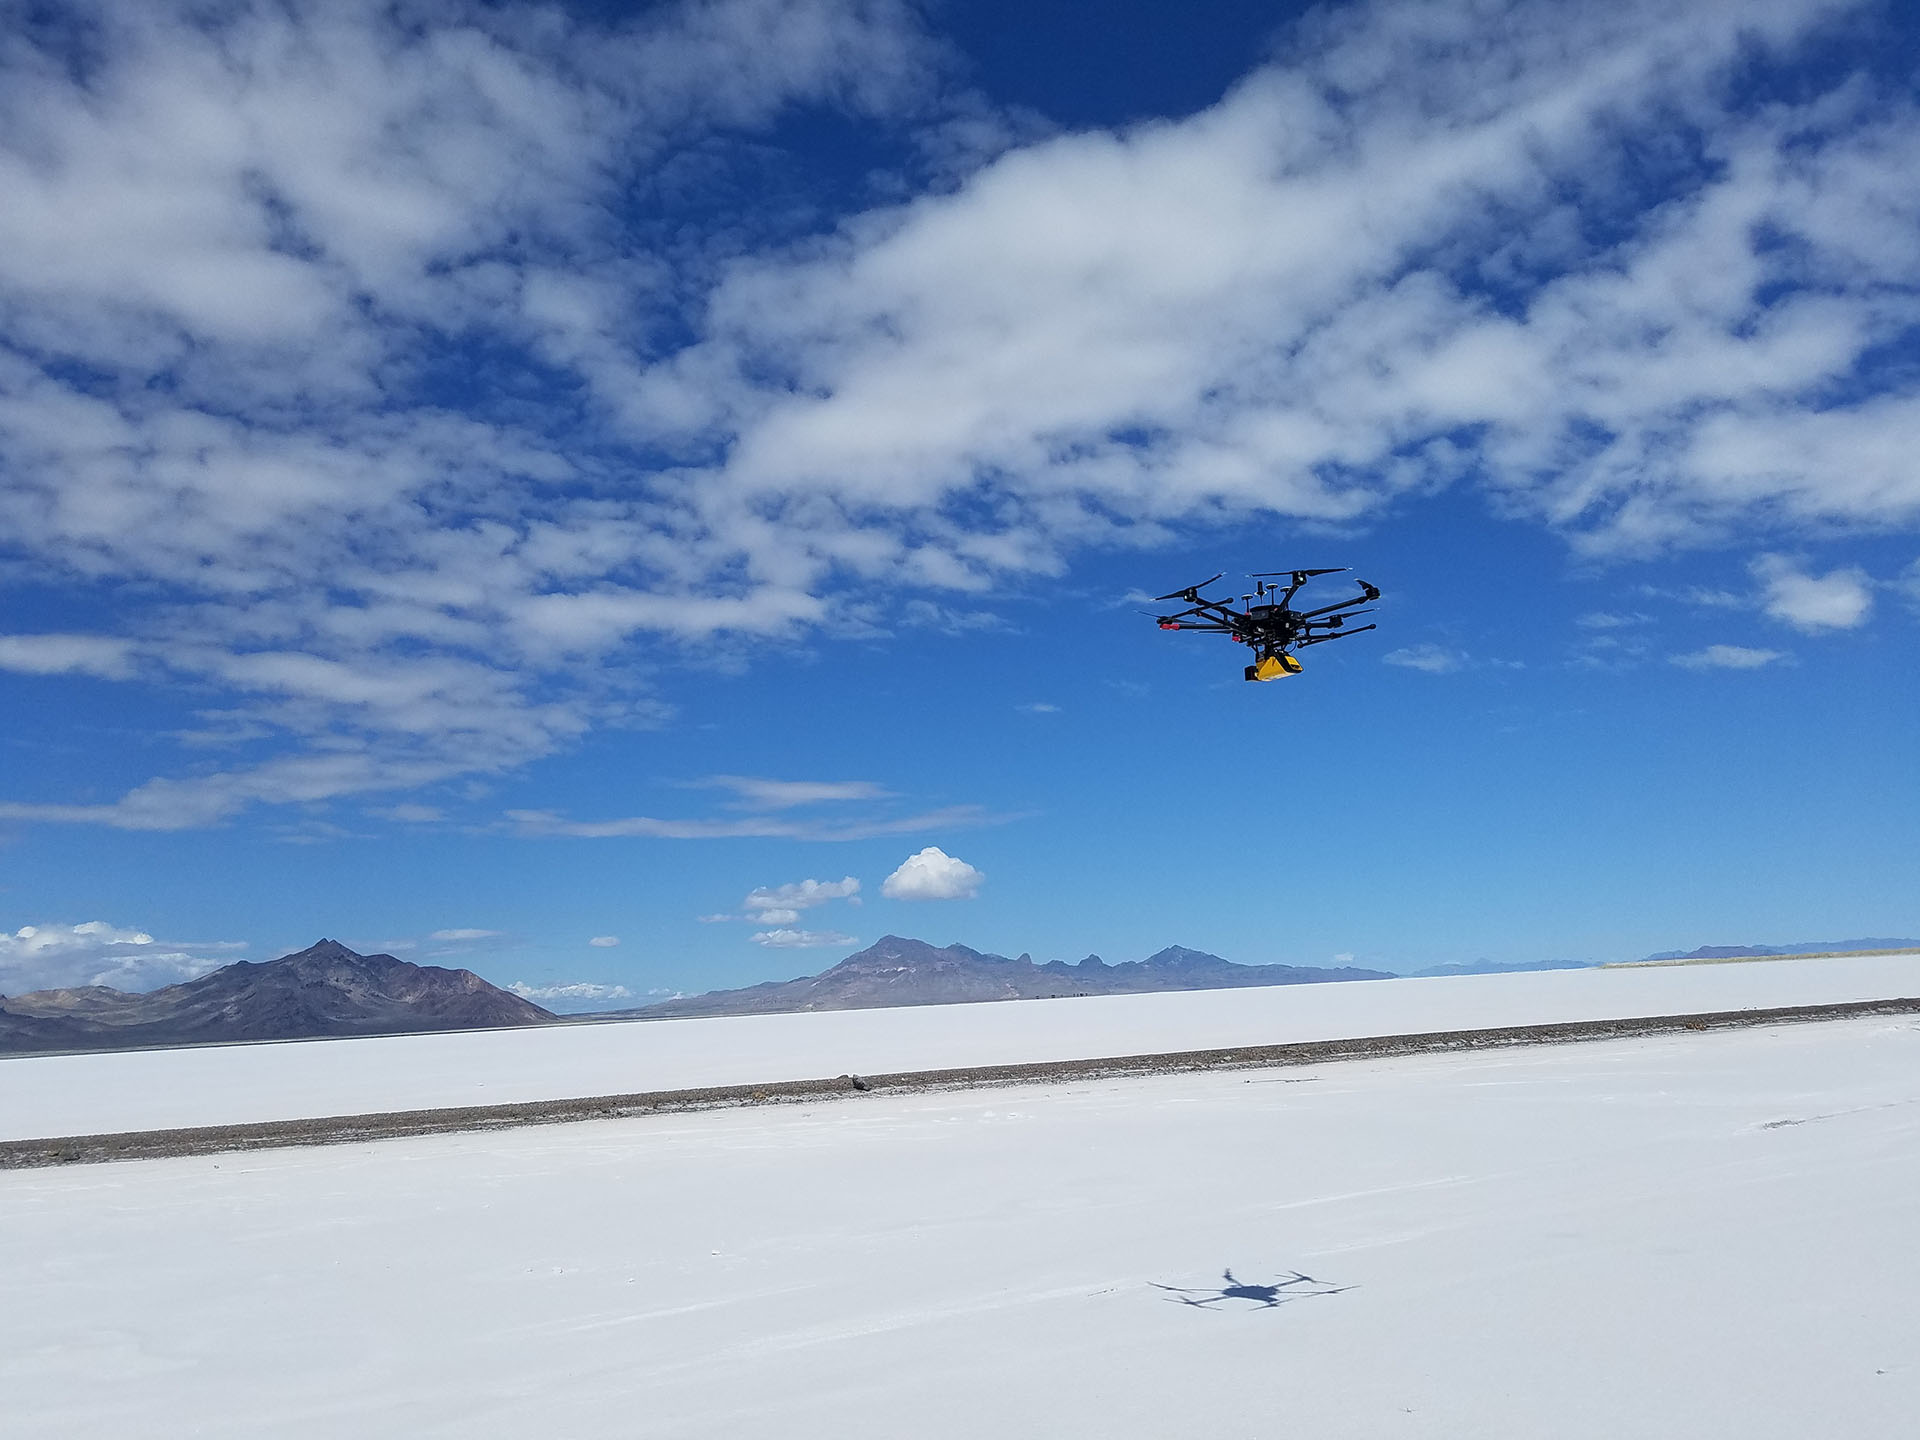 Image of a drone leaving the ground with blue sky, clouds, and mountains in the background.